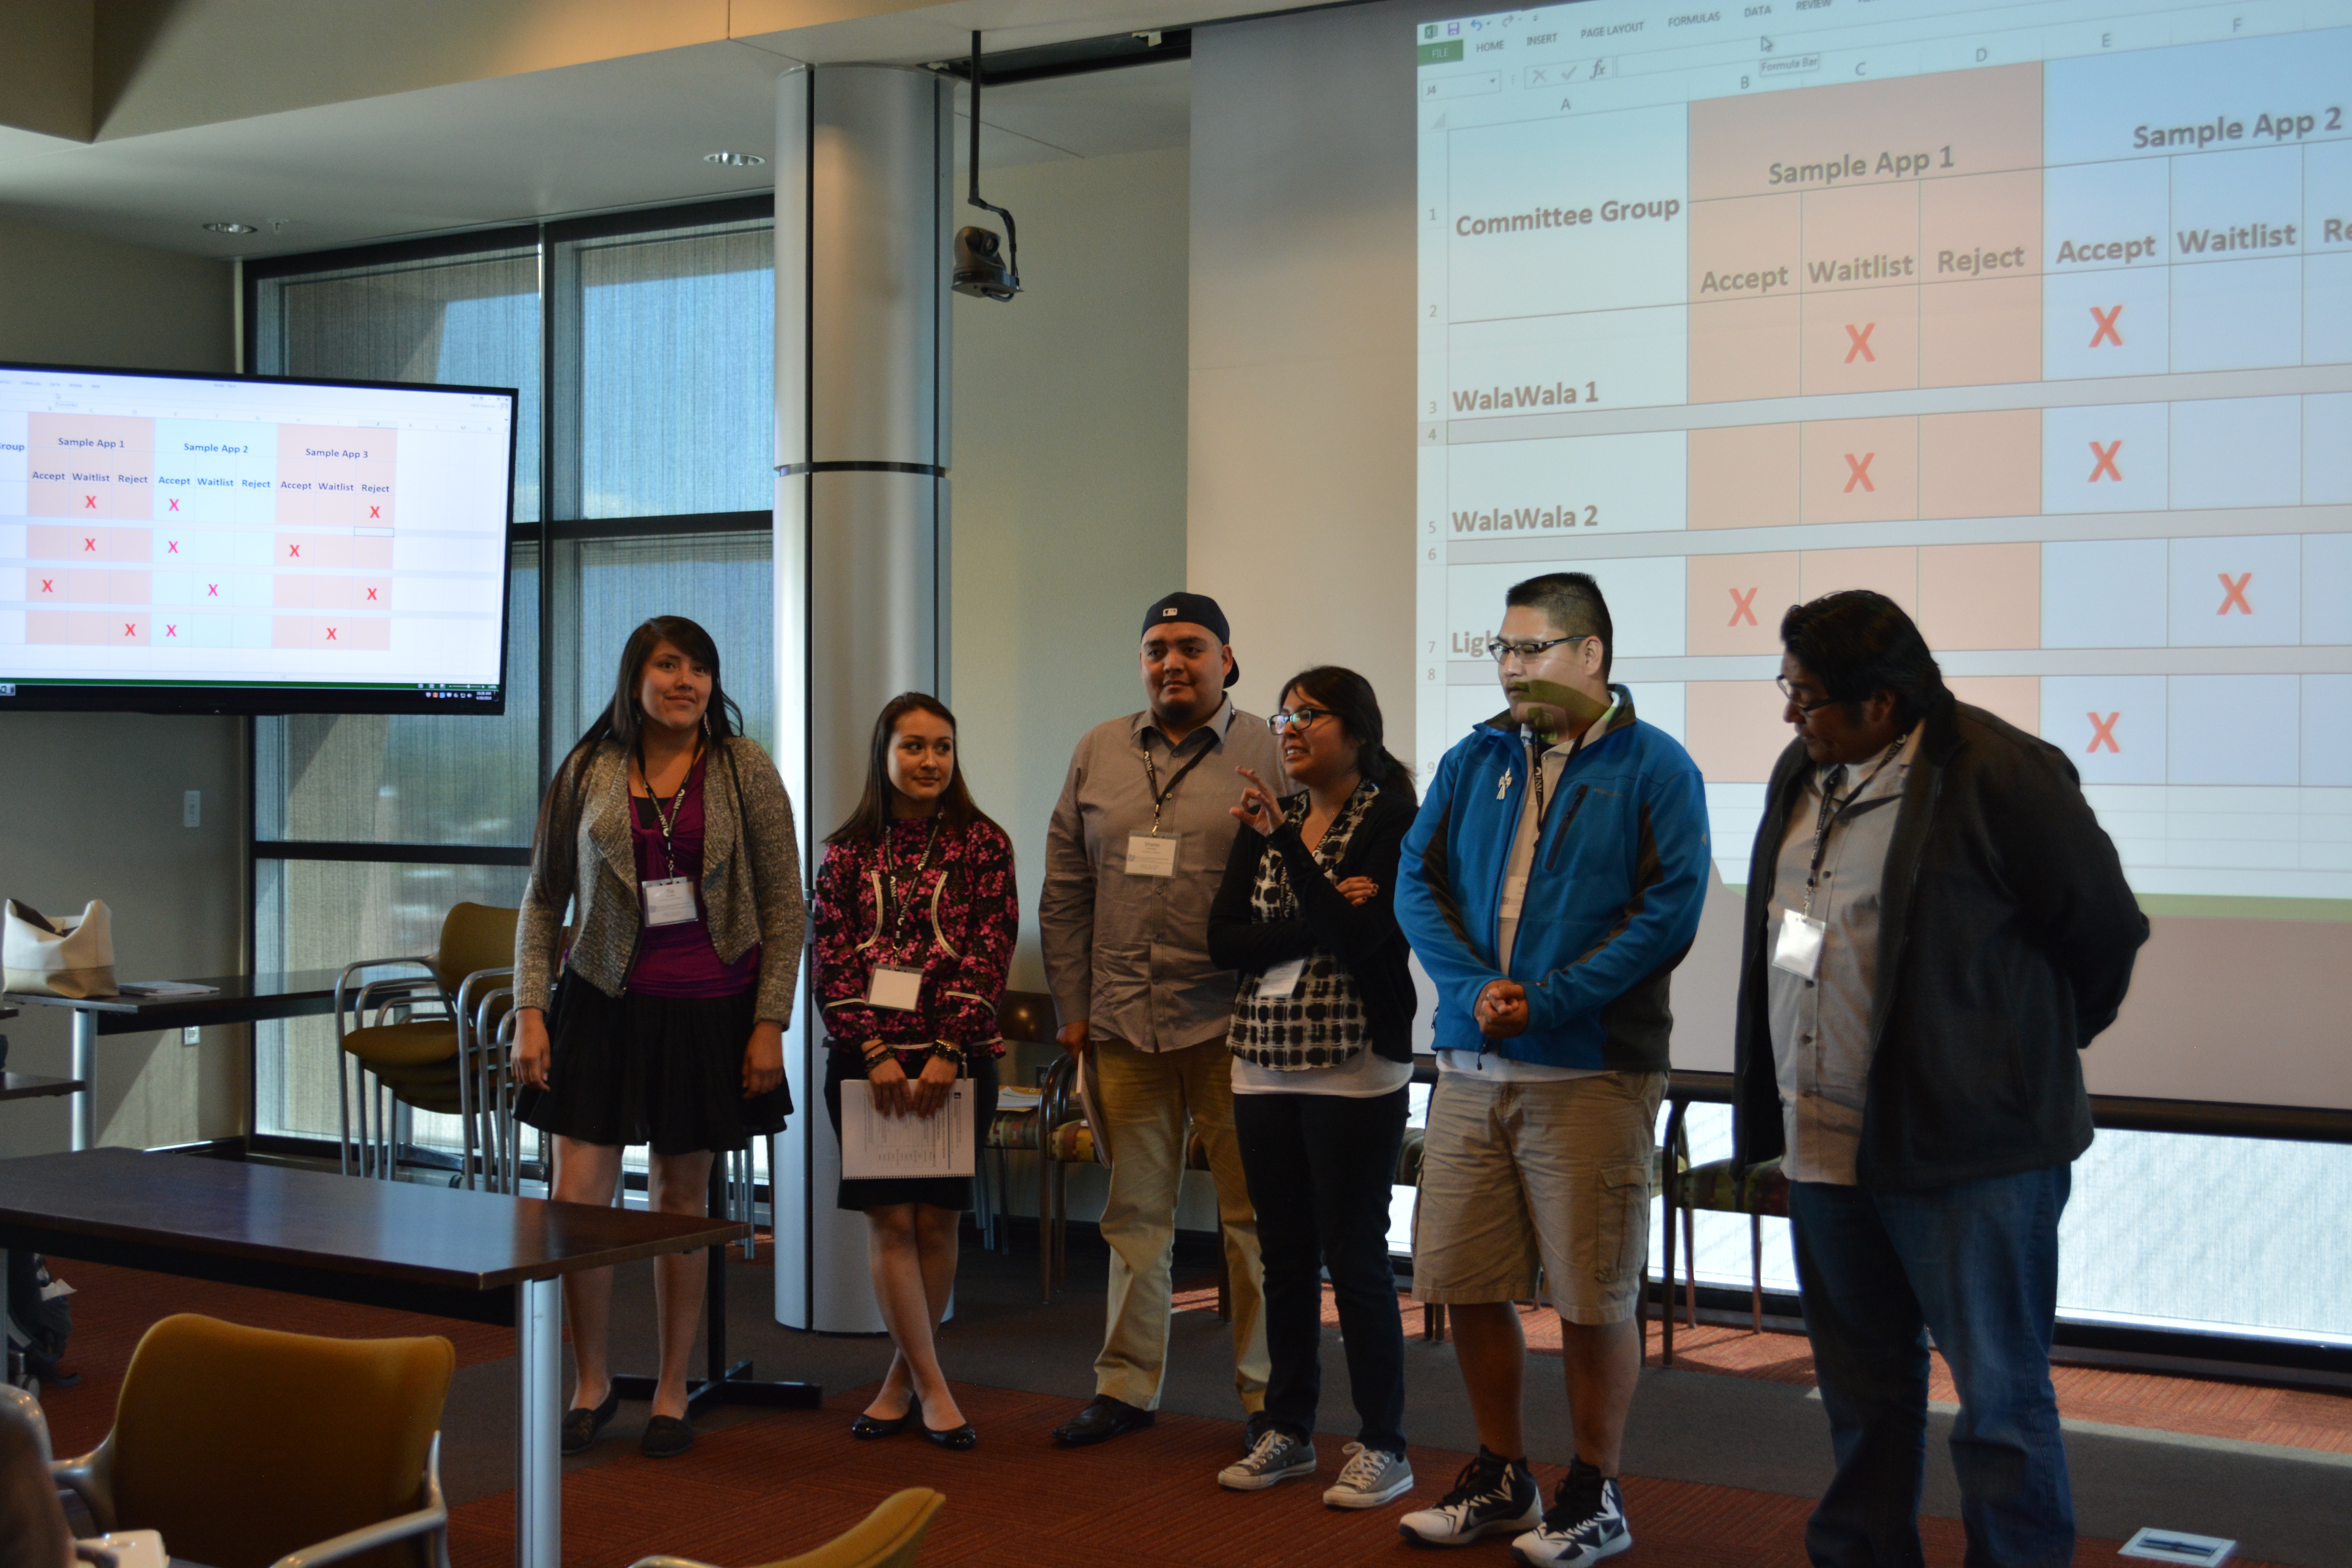 Group presenting with powerpoint.